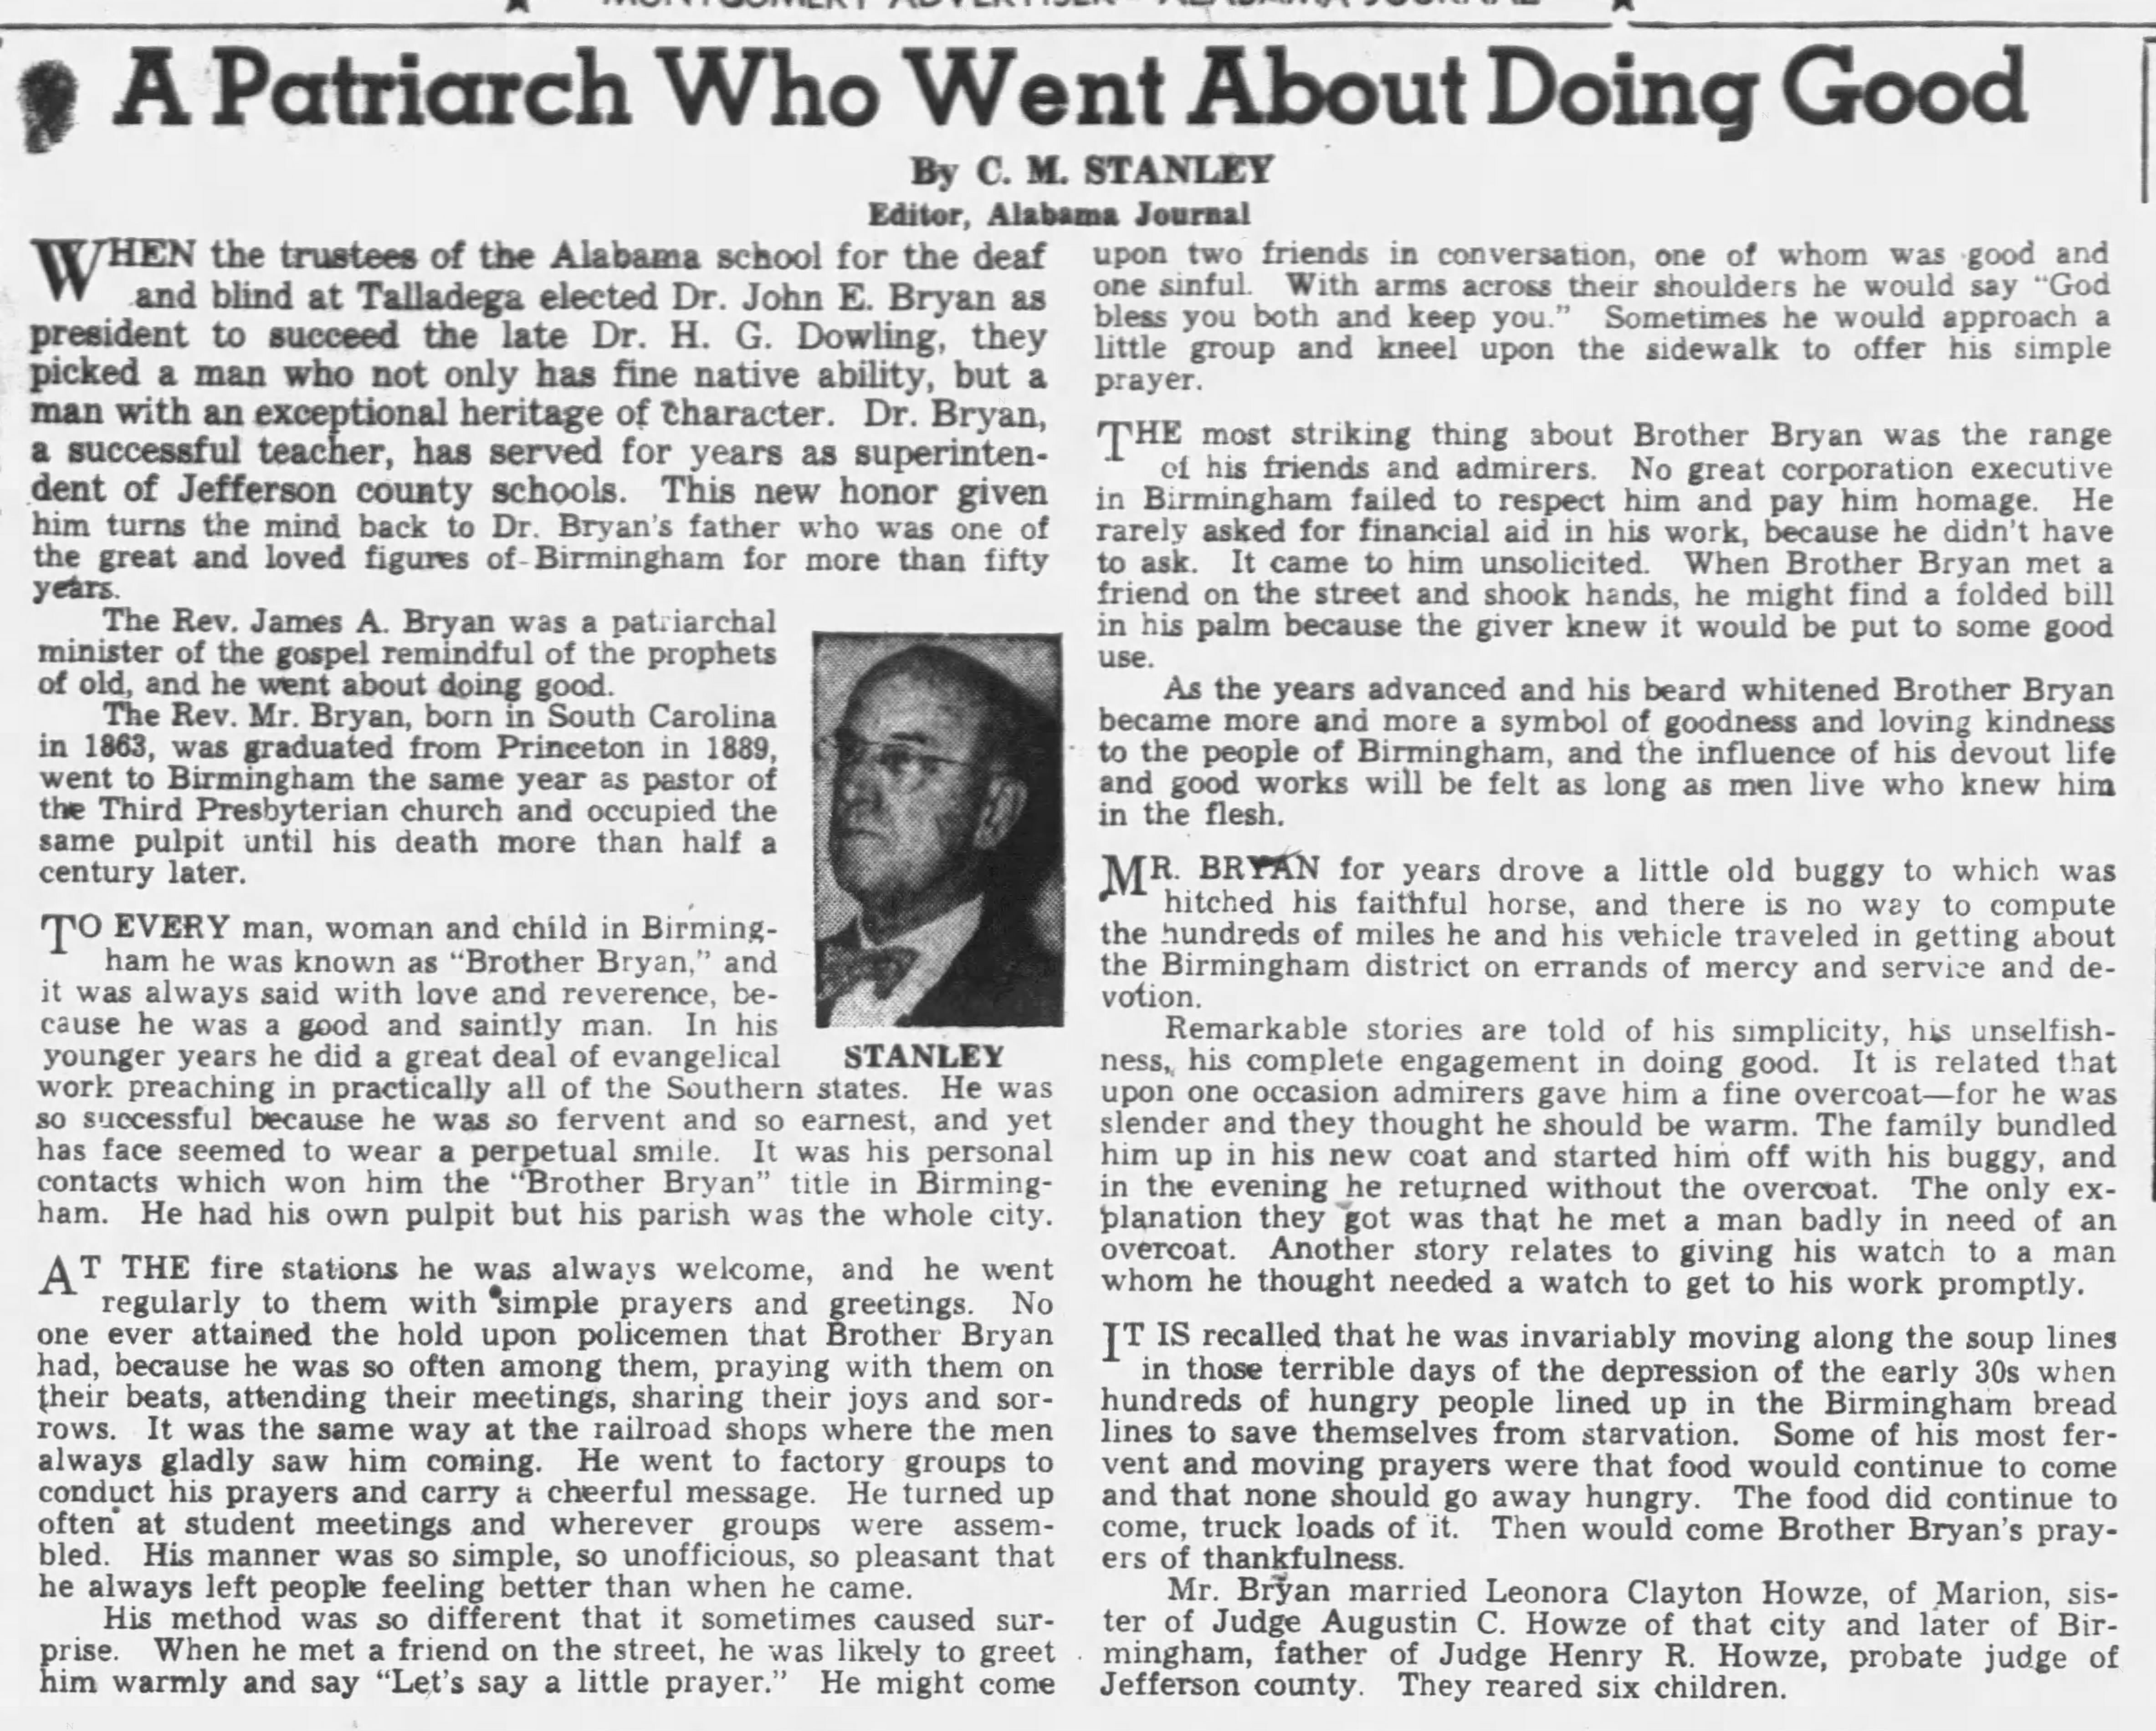 The Patriarch Who Went About Doing Good